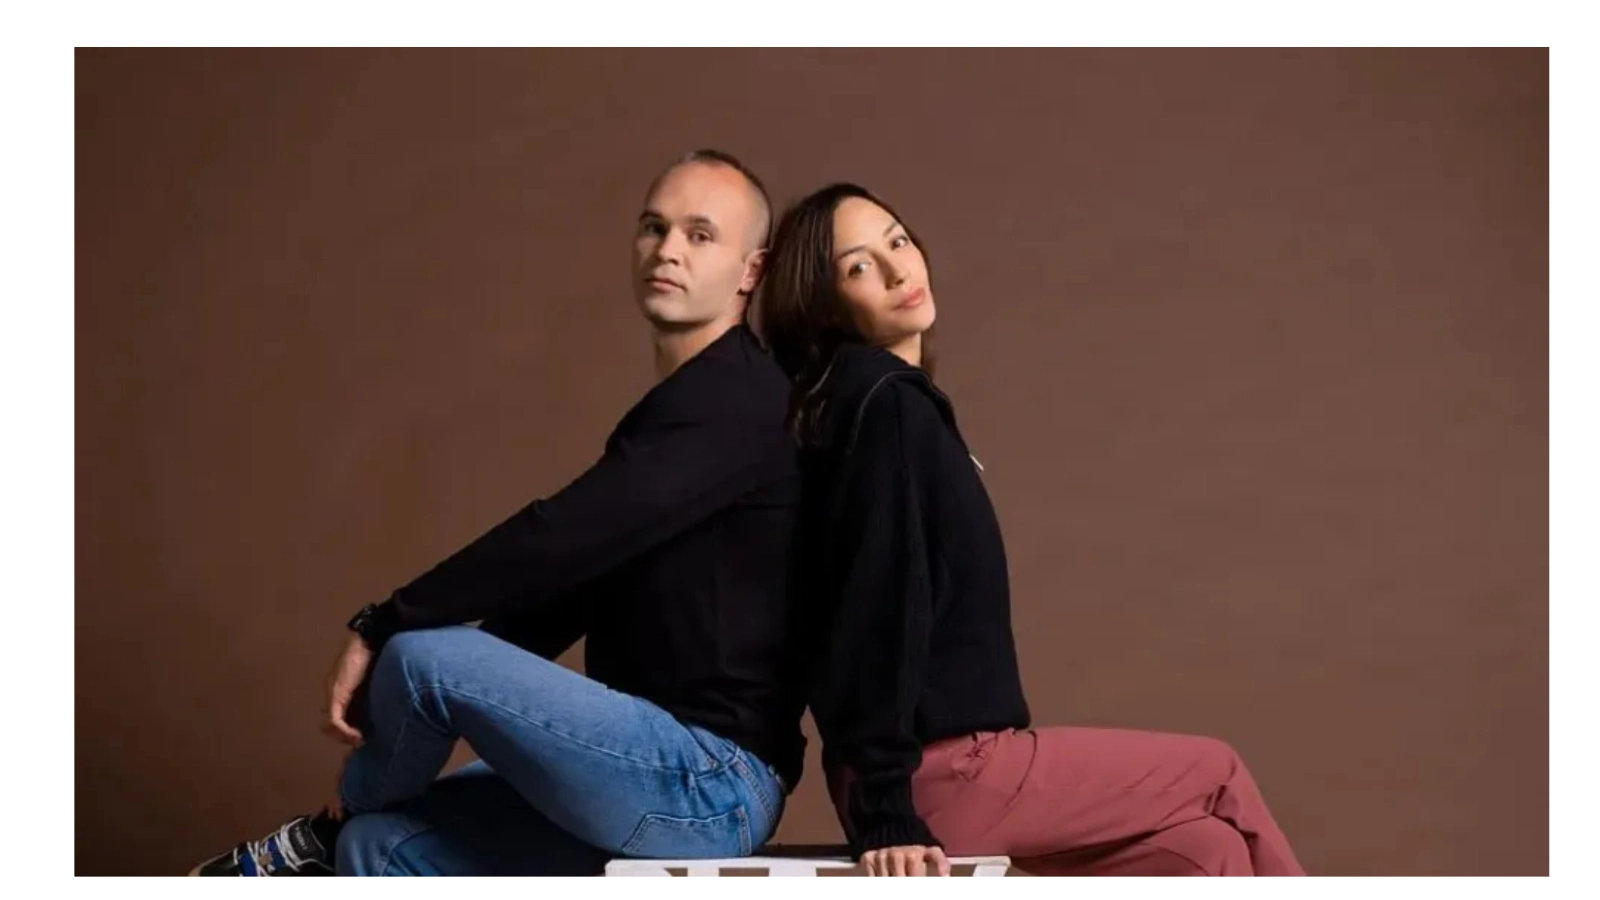 Who Is Andres Iniesta Wife? Know All About Anna Ortiz.